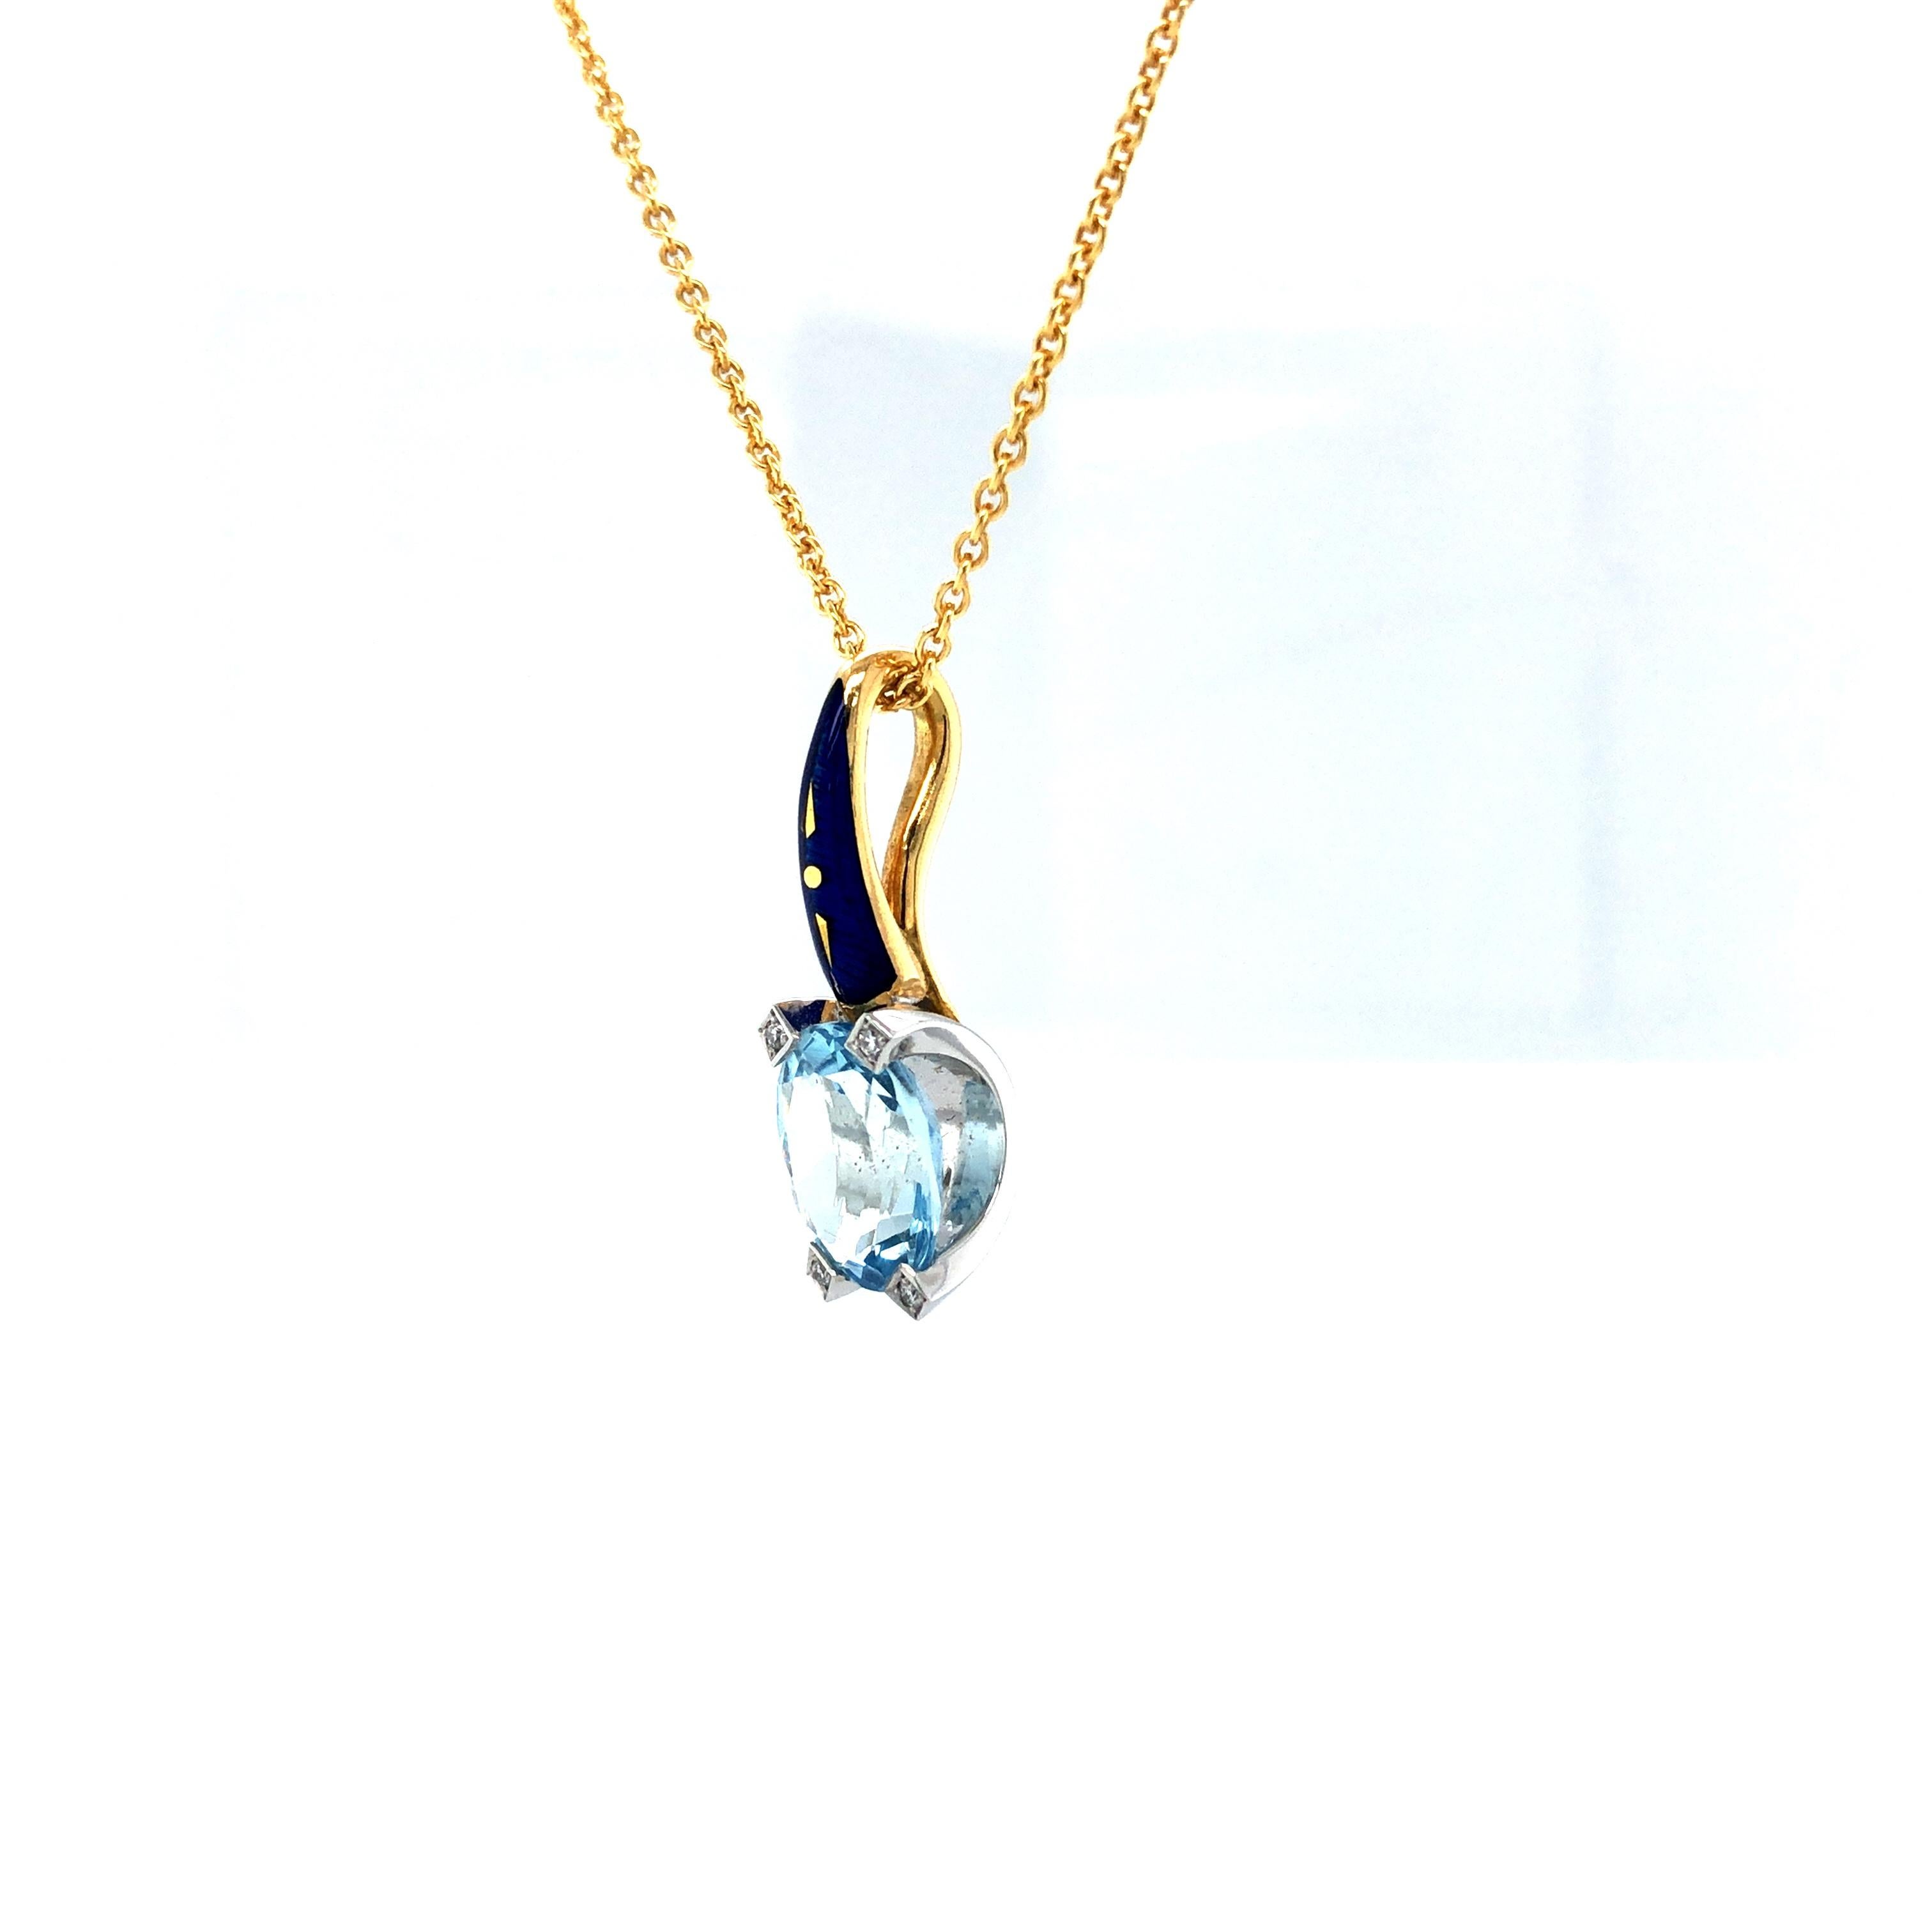 Victor Mayer pendant 18k yellow gold white gold, Cocktail collection, dark blue vitreous enamel, 5 diamonds 0.03 ct G VS brilliant cut, Aquamarine

About the creator Victor Mayer
Victor Mayer is internationally renowned for elegant timeless designs